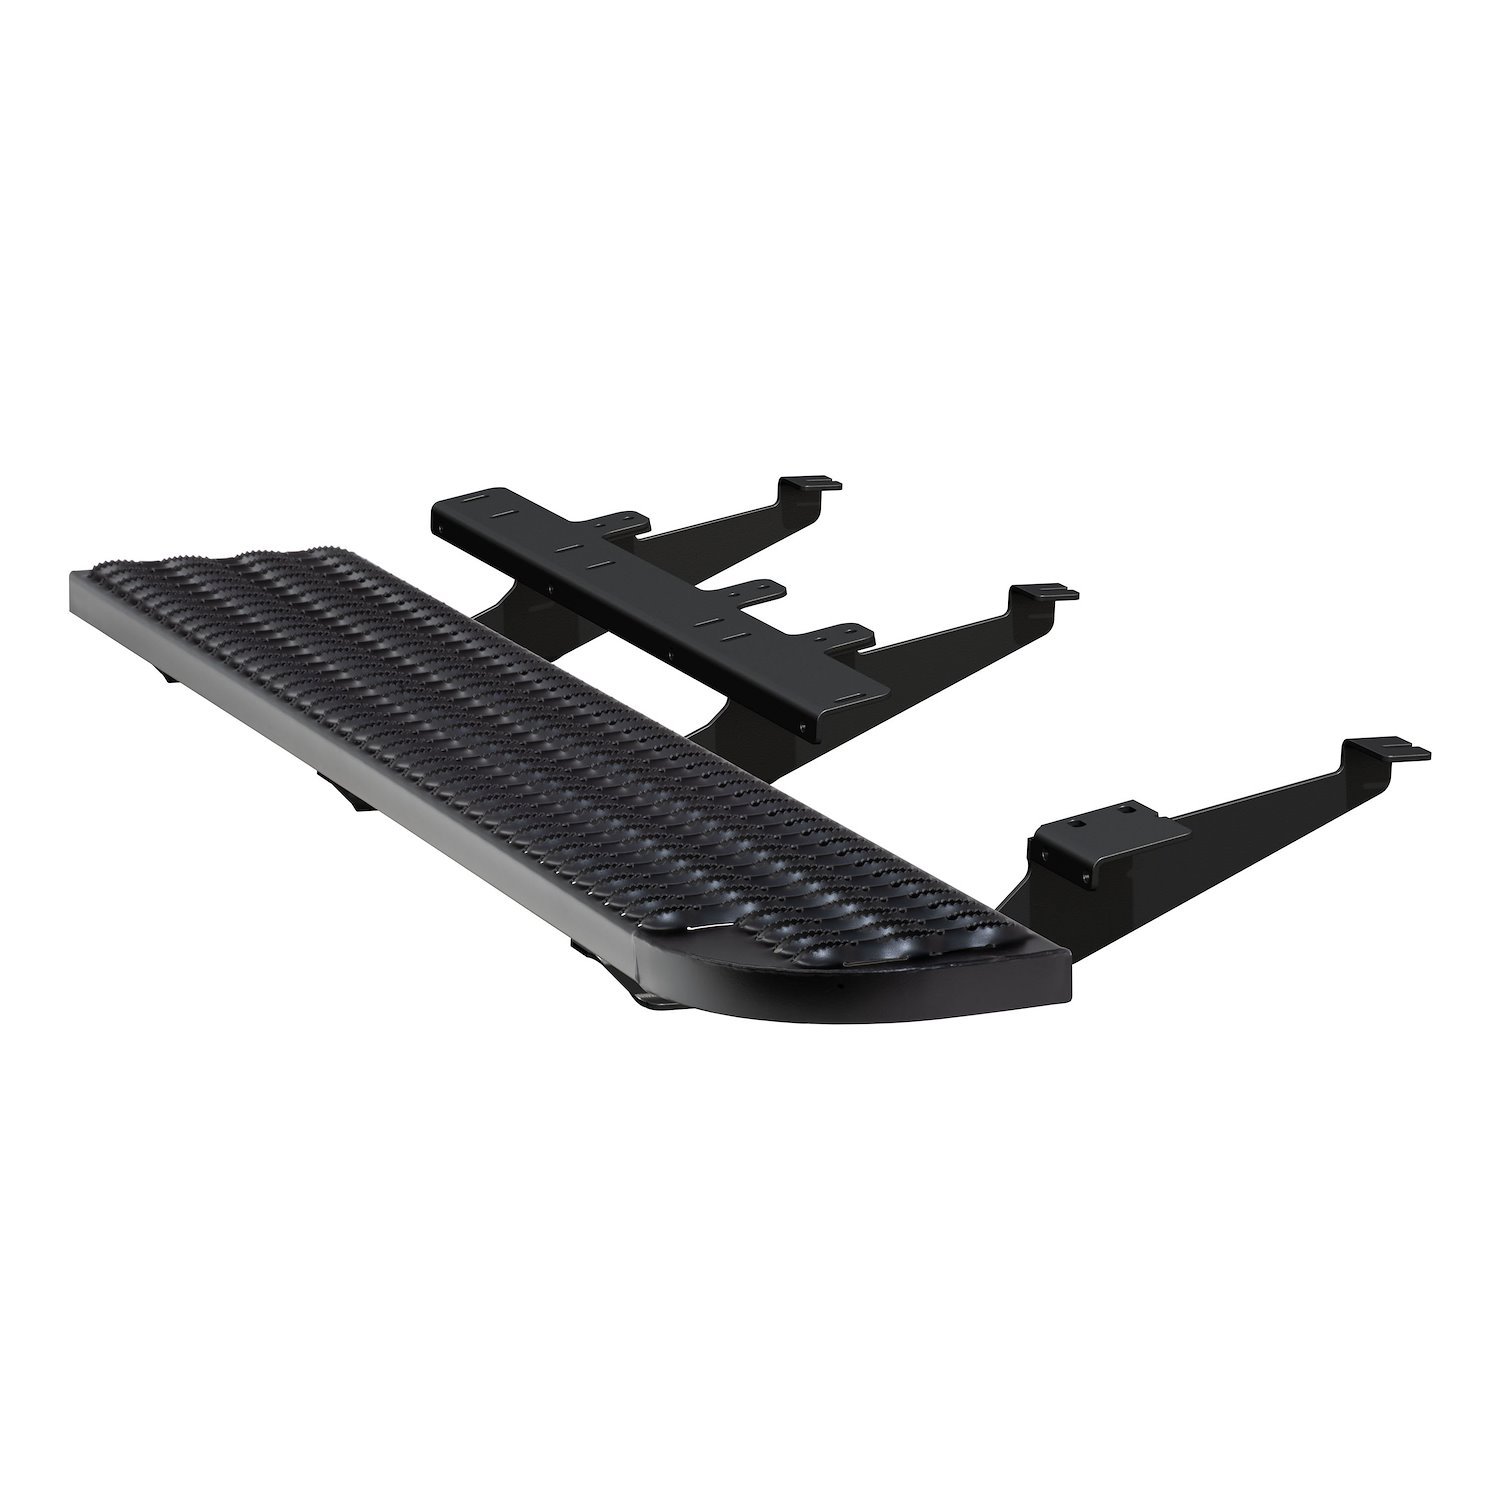 495154-401802 Grip Step XL 9-1/2 in. x 54 in. Steel Passenger Running Board Fits Select Ram ProMaster